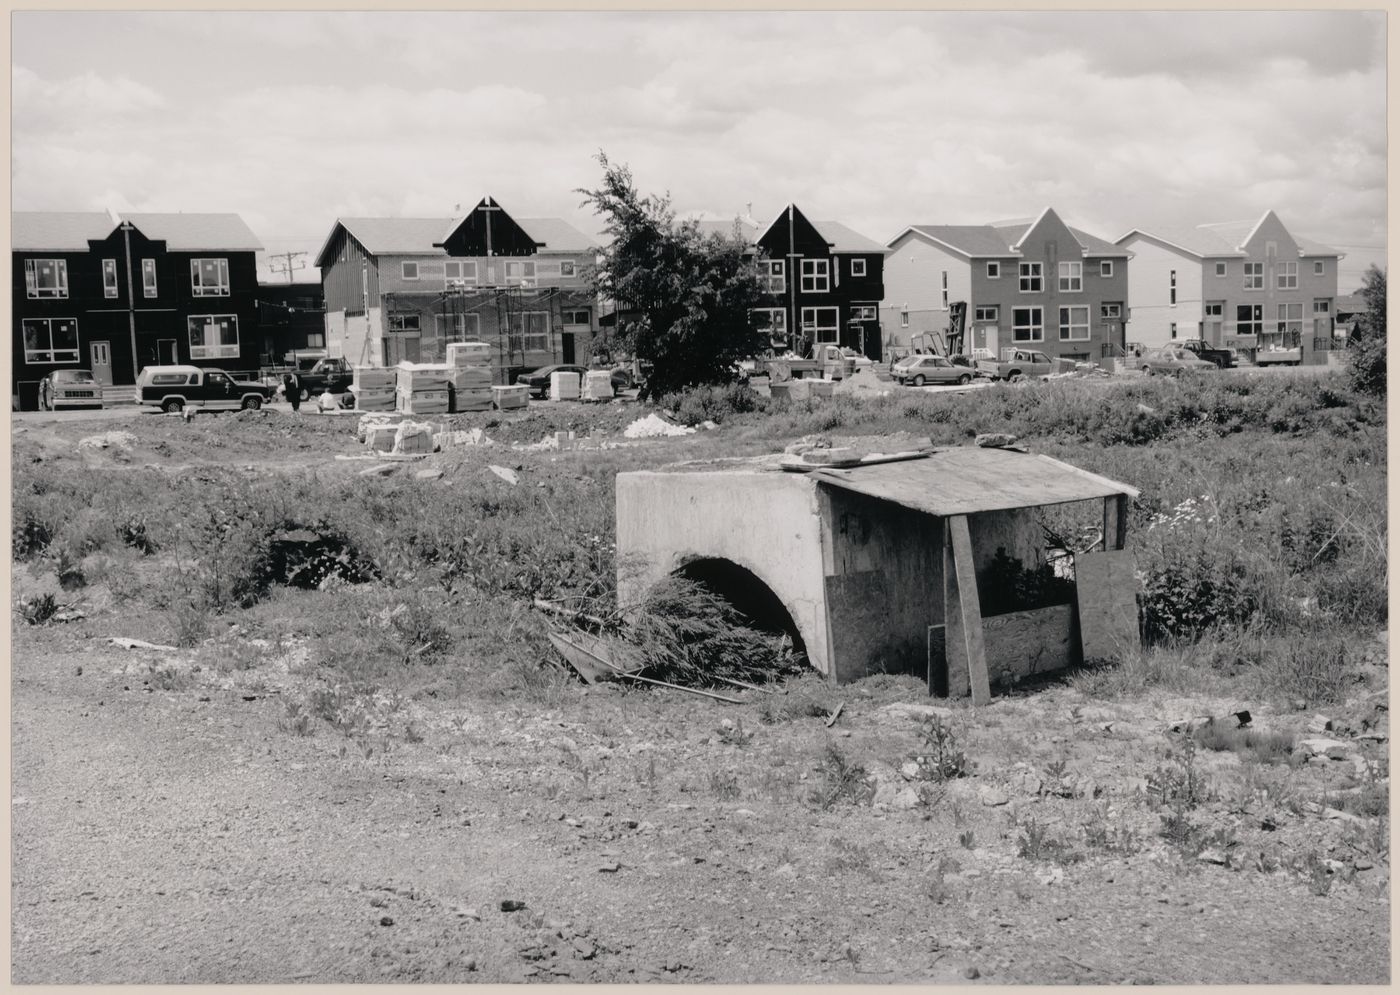 Field Work in Montreal: View of a wood and concrete shack-like structure, a vacant lot and double houses under construction, Montréal, Québec